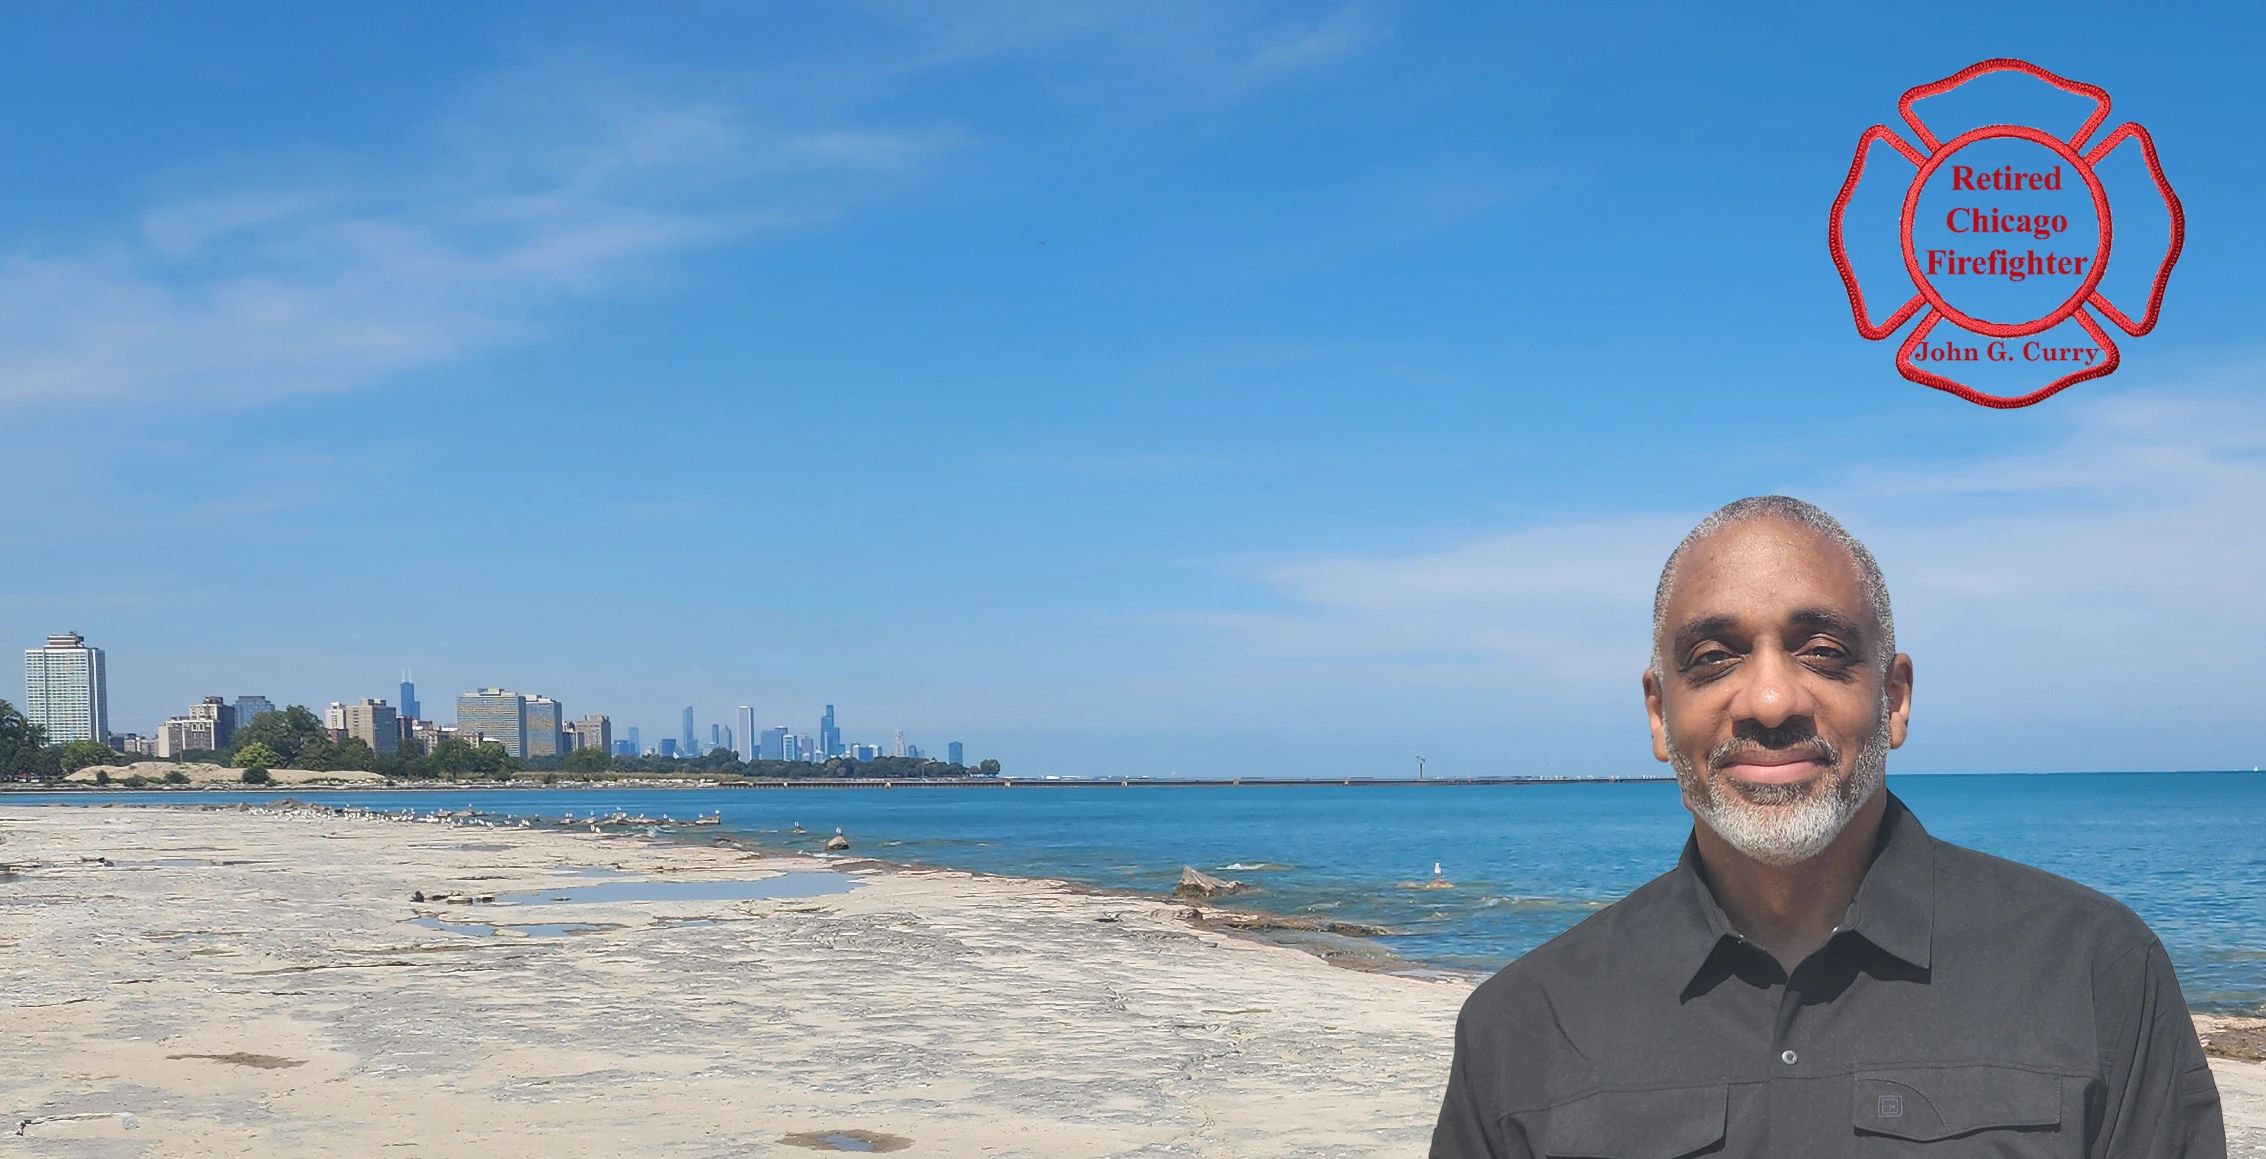 Retired Chicago firefighter John G. Curry at Lake Michigan at 67th Street in Chicago, Illinois, USA